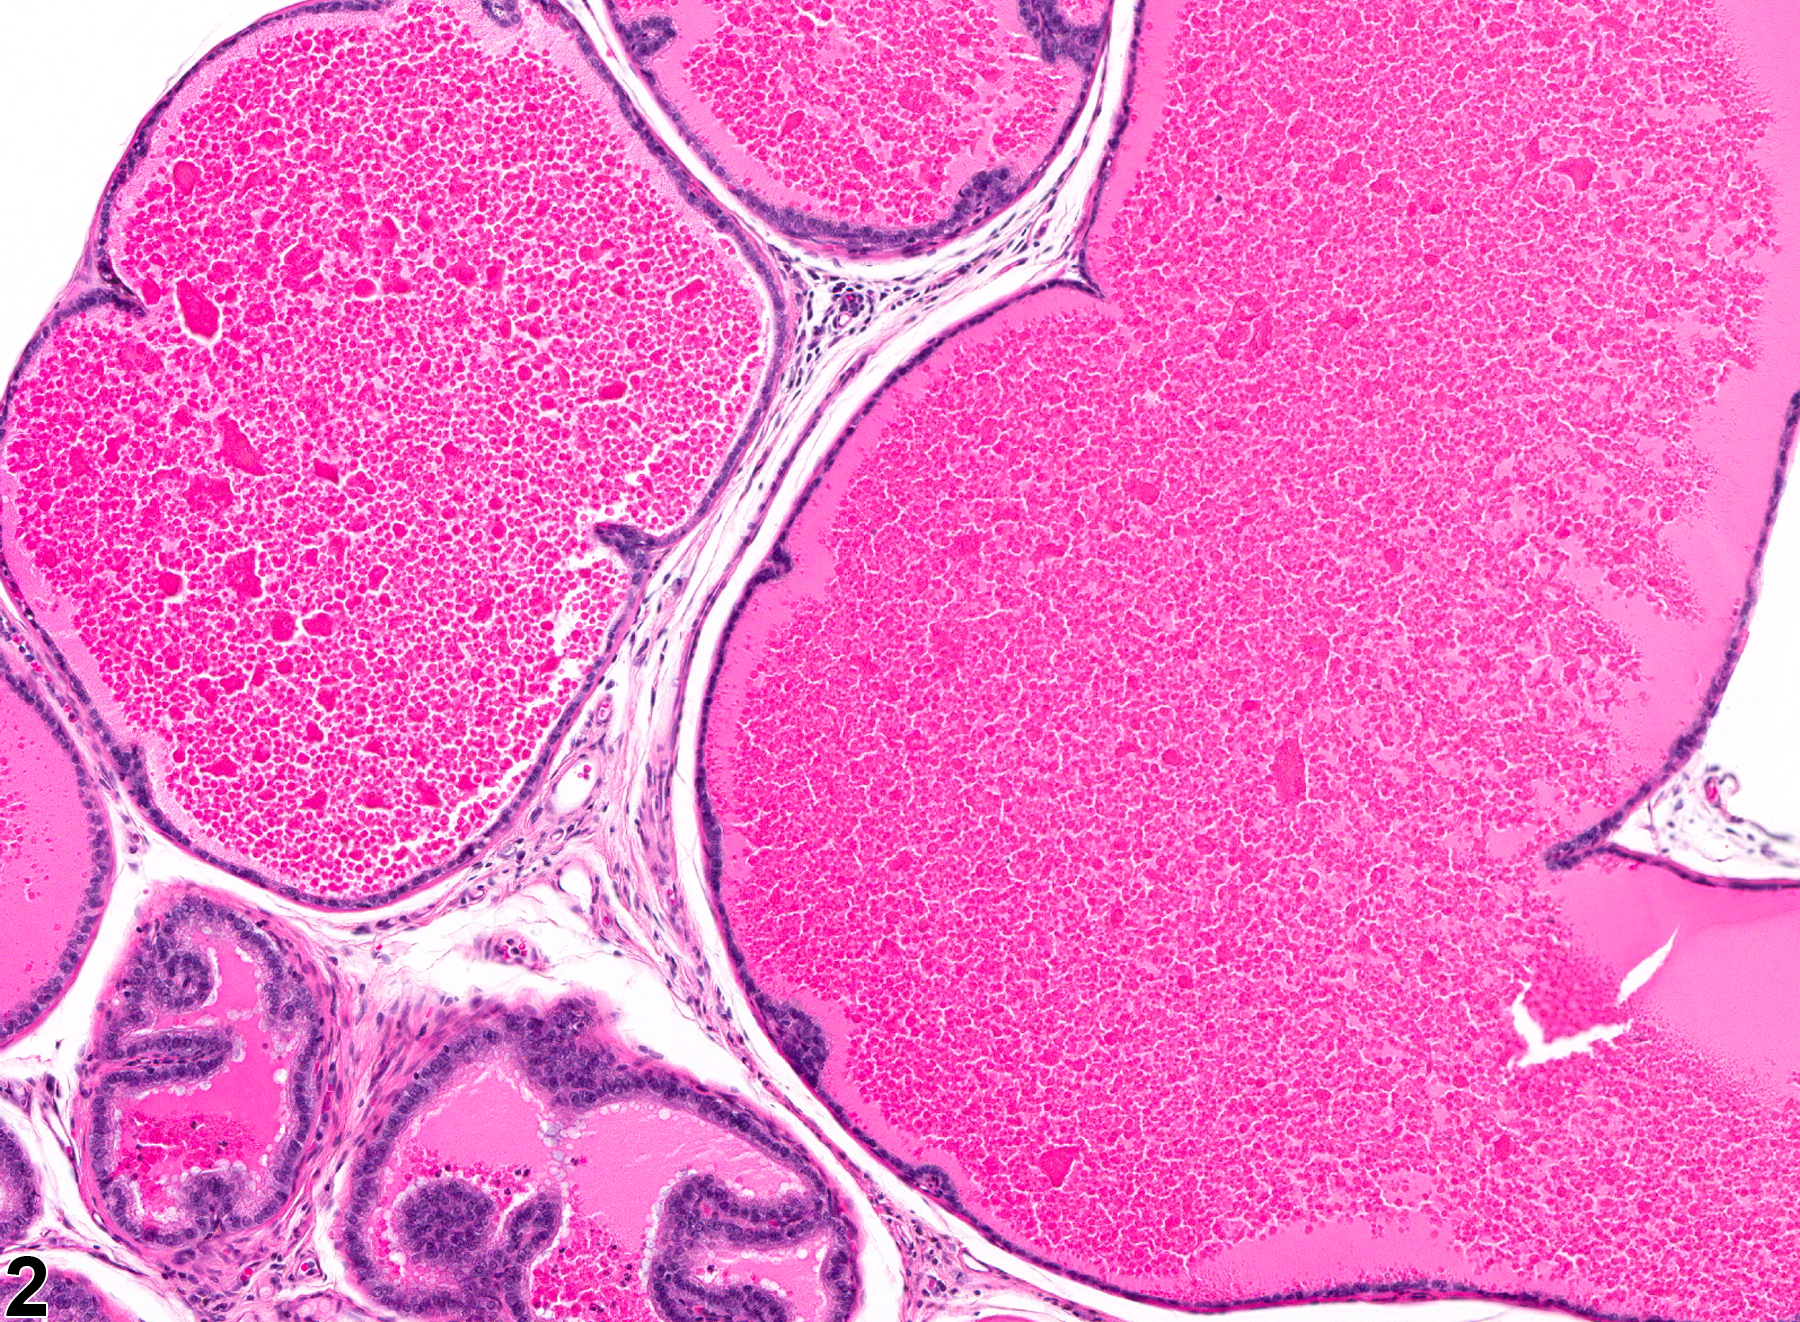 Image of acinar dilation in the prostate from a male F344/N rat in a chronic study